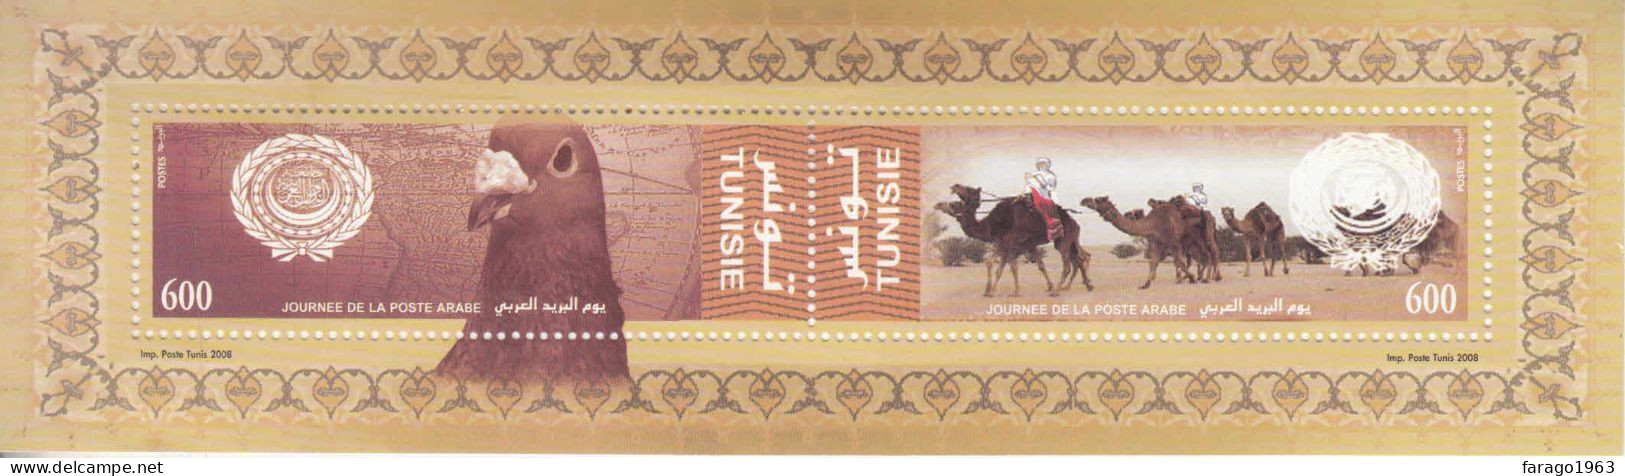 2008 Tunisia Arab Post Day Camels Pigeon JOINT ISSUE Souvenir Sheet MNH - Tunisie (1956-...)